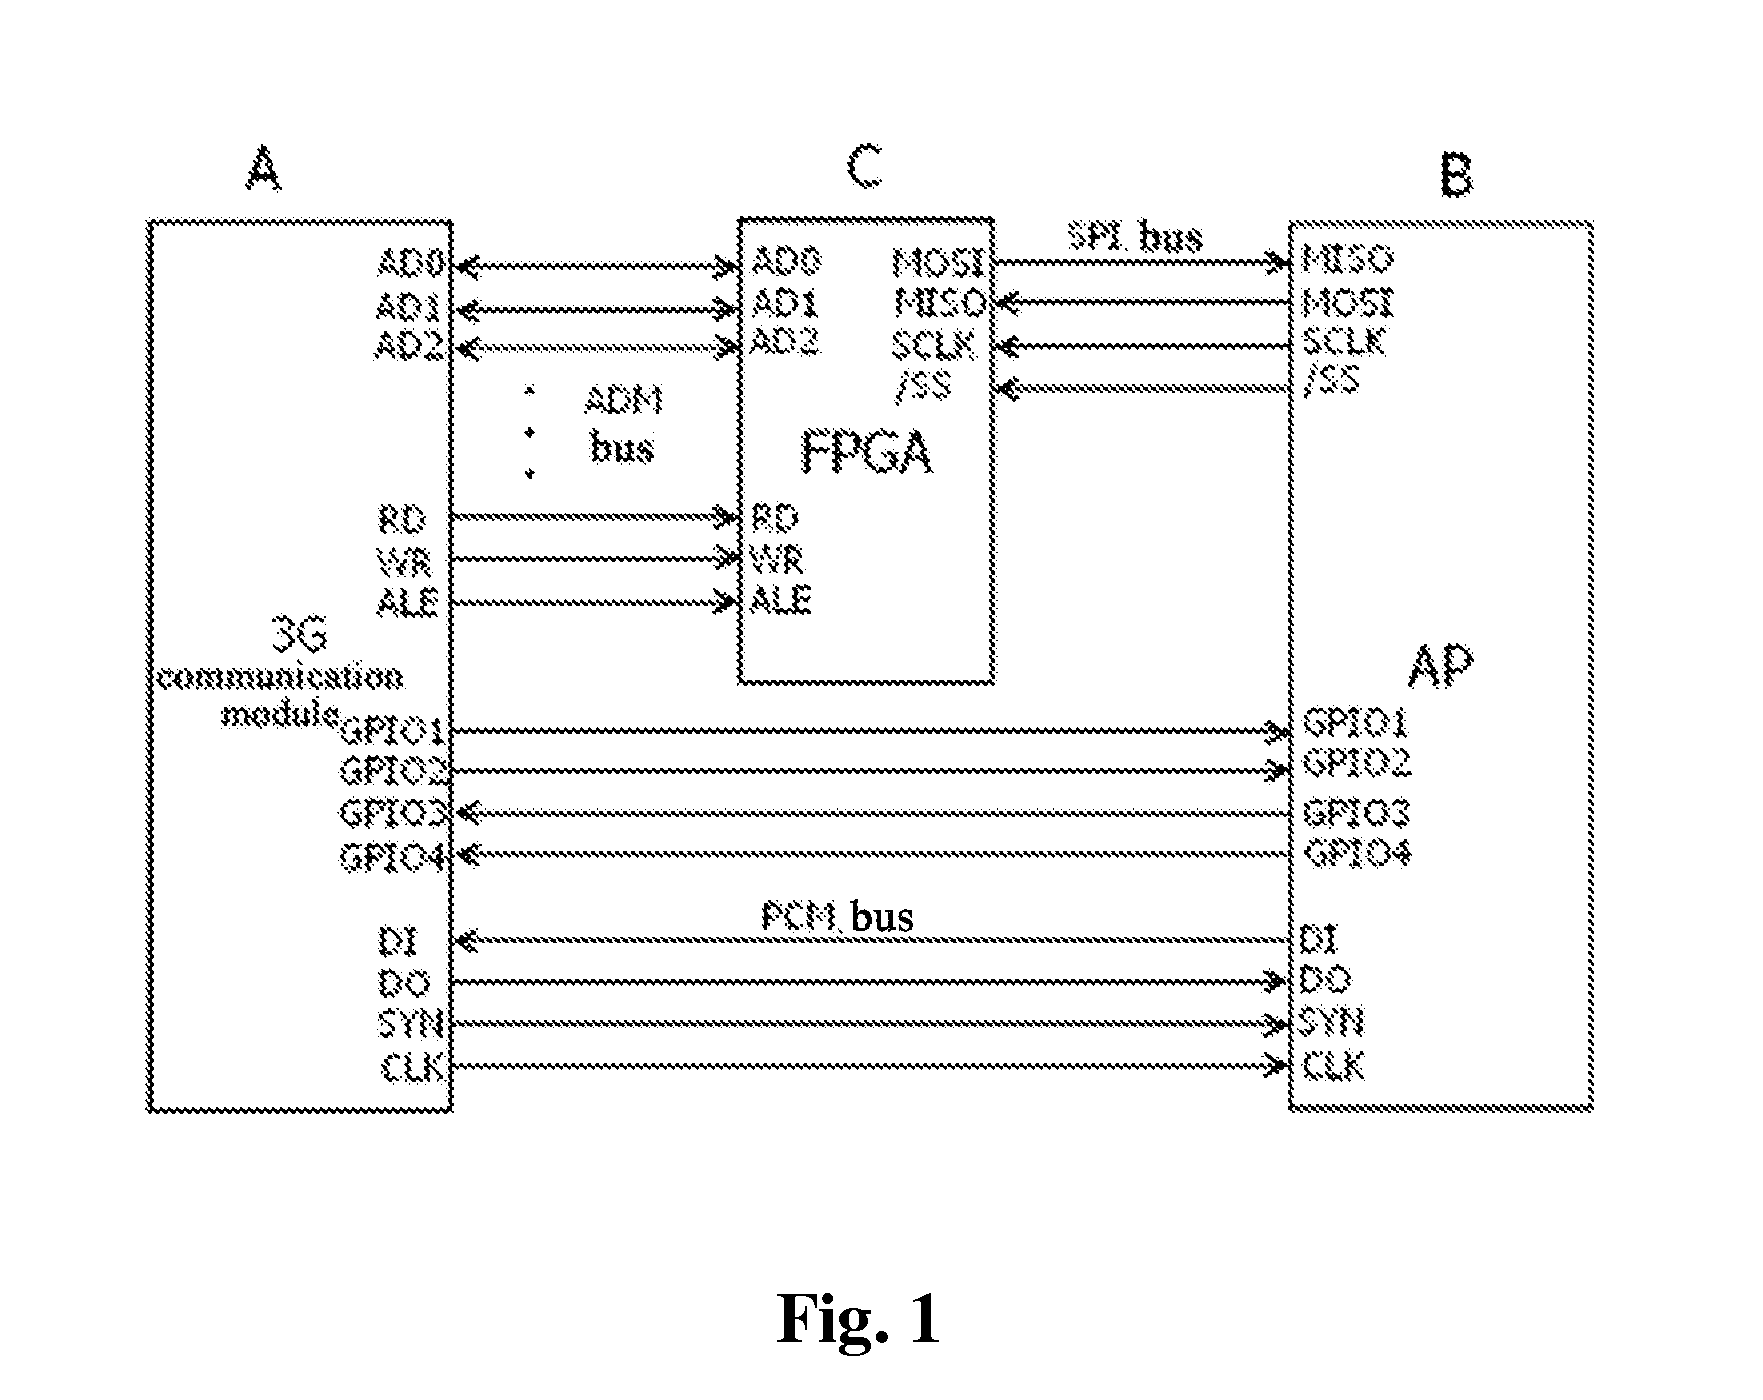 Device and Method for Enhancing Flexibility of Interface Between 3G Communication Module and Application Processor